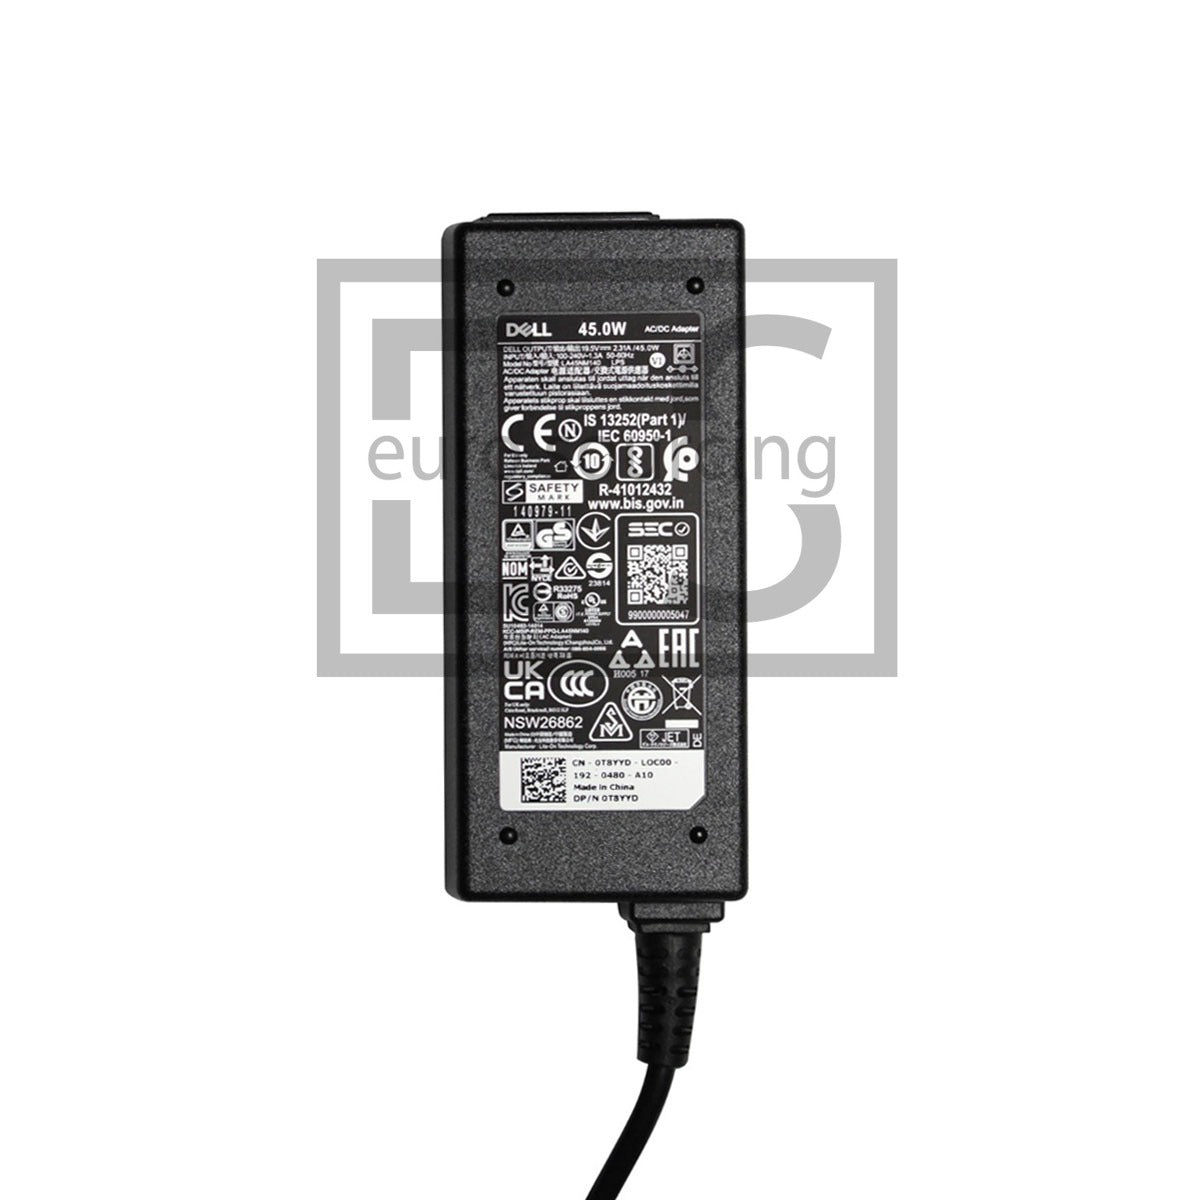 Genuine DELL 19.5V 2.31A DELC231 *ROUND* TYPE DELL BRAND 45W AC ADAPTER 4.5MM x 3.0MM Compatible With DELL INSPIRON 15 3581